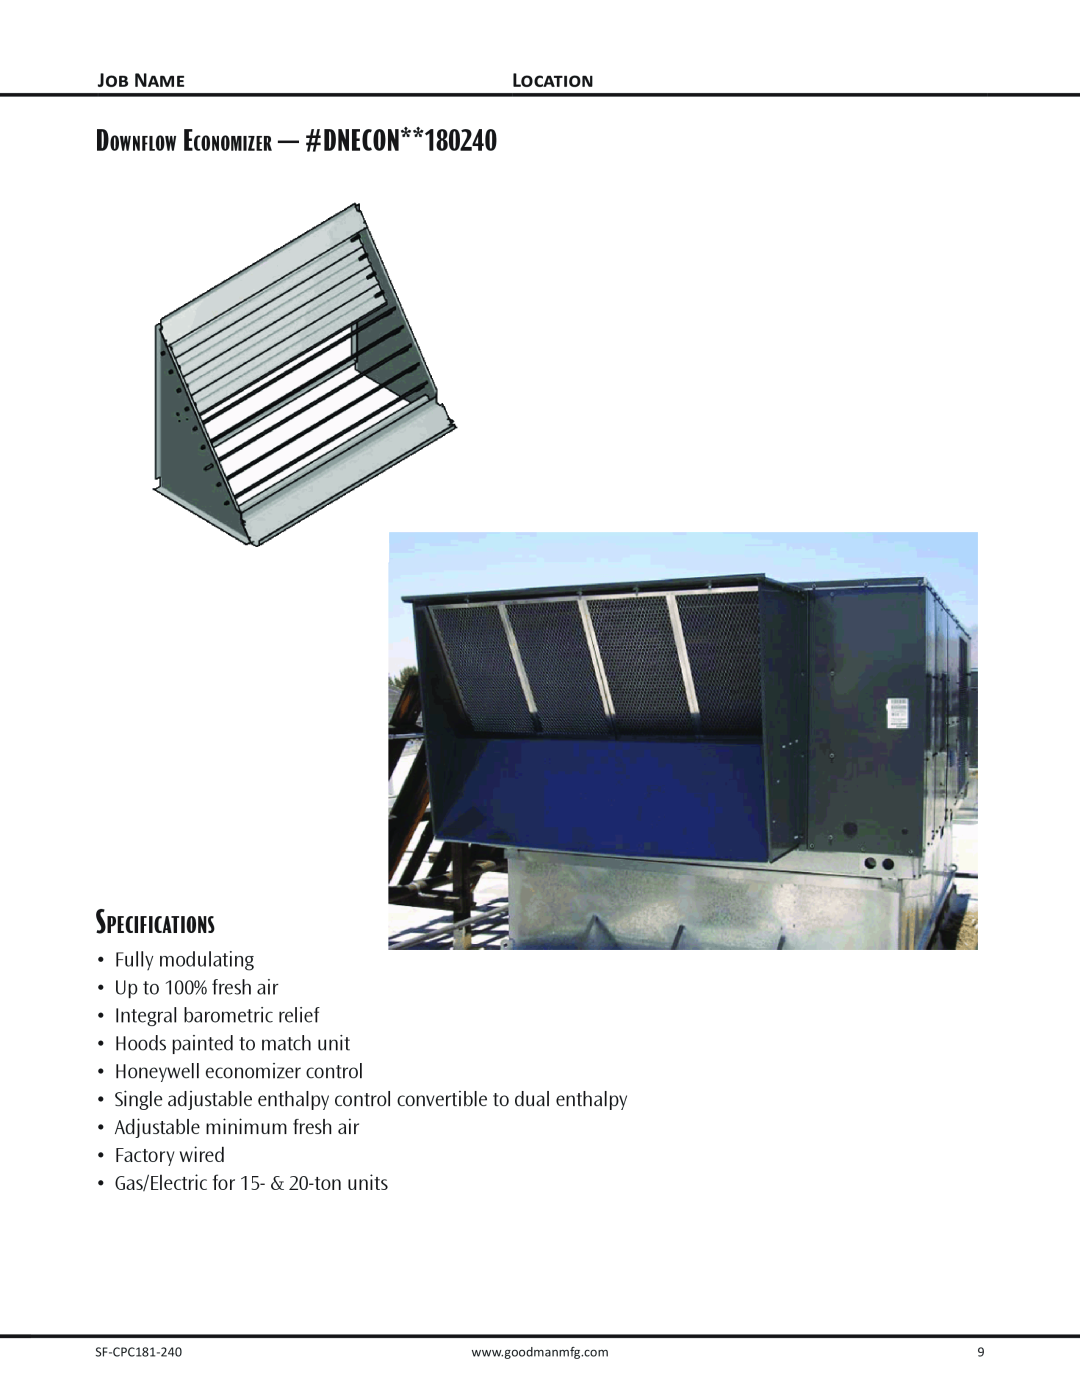 Goodman Mfg Self-Contained Packaged Air Conditioner with R-410A Downflow Economizer - #DNECON**180240, Specifications 